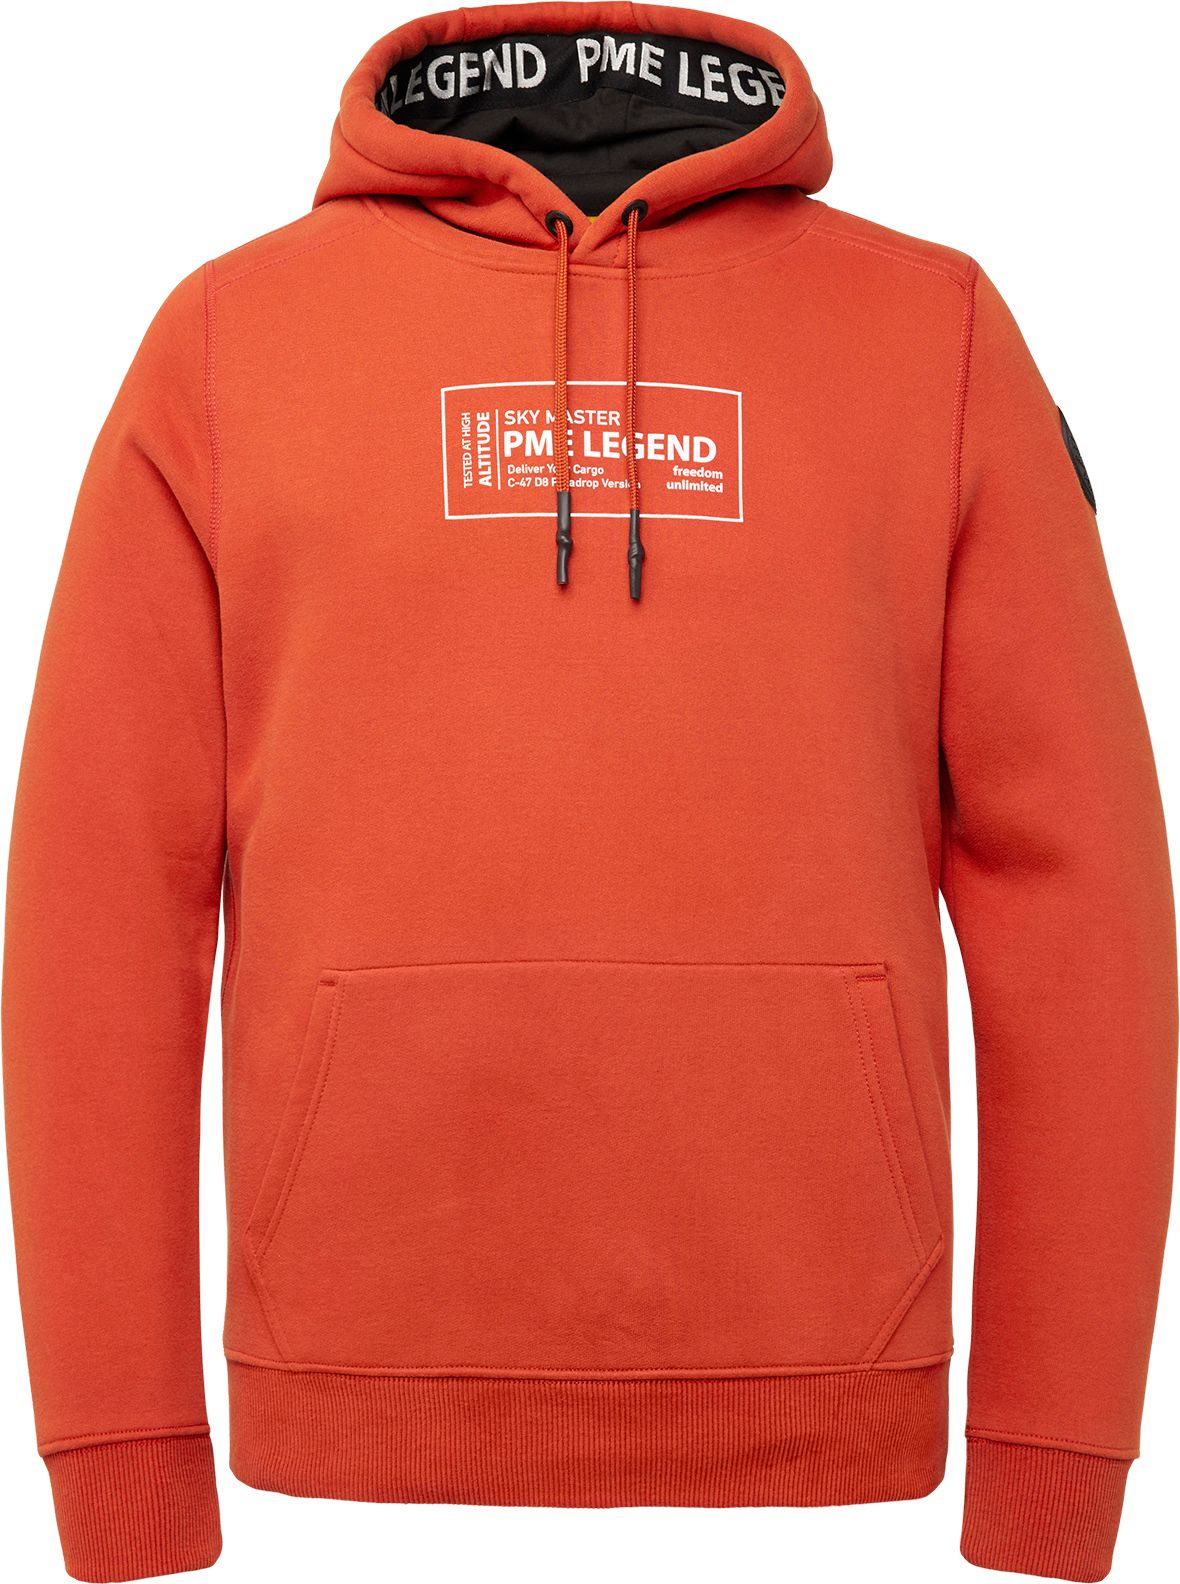 PME Legend Hoodie Brushed Red size M